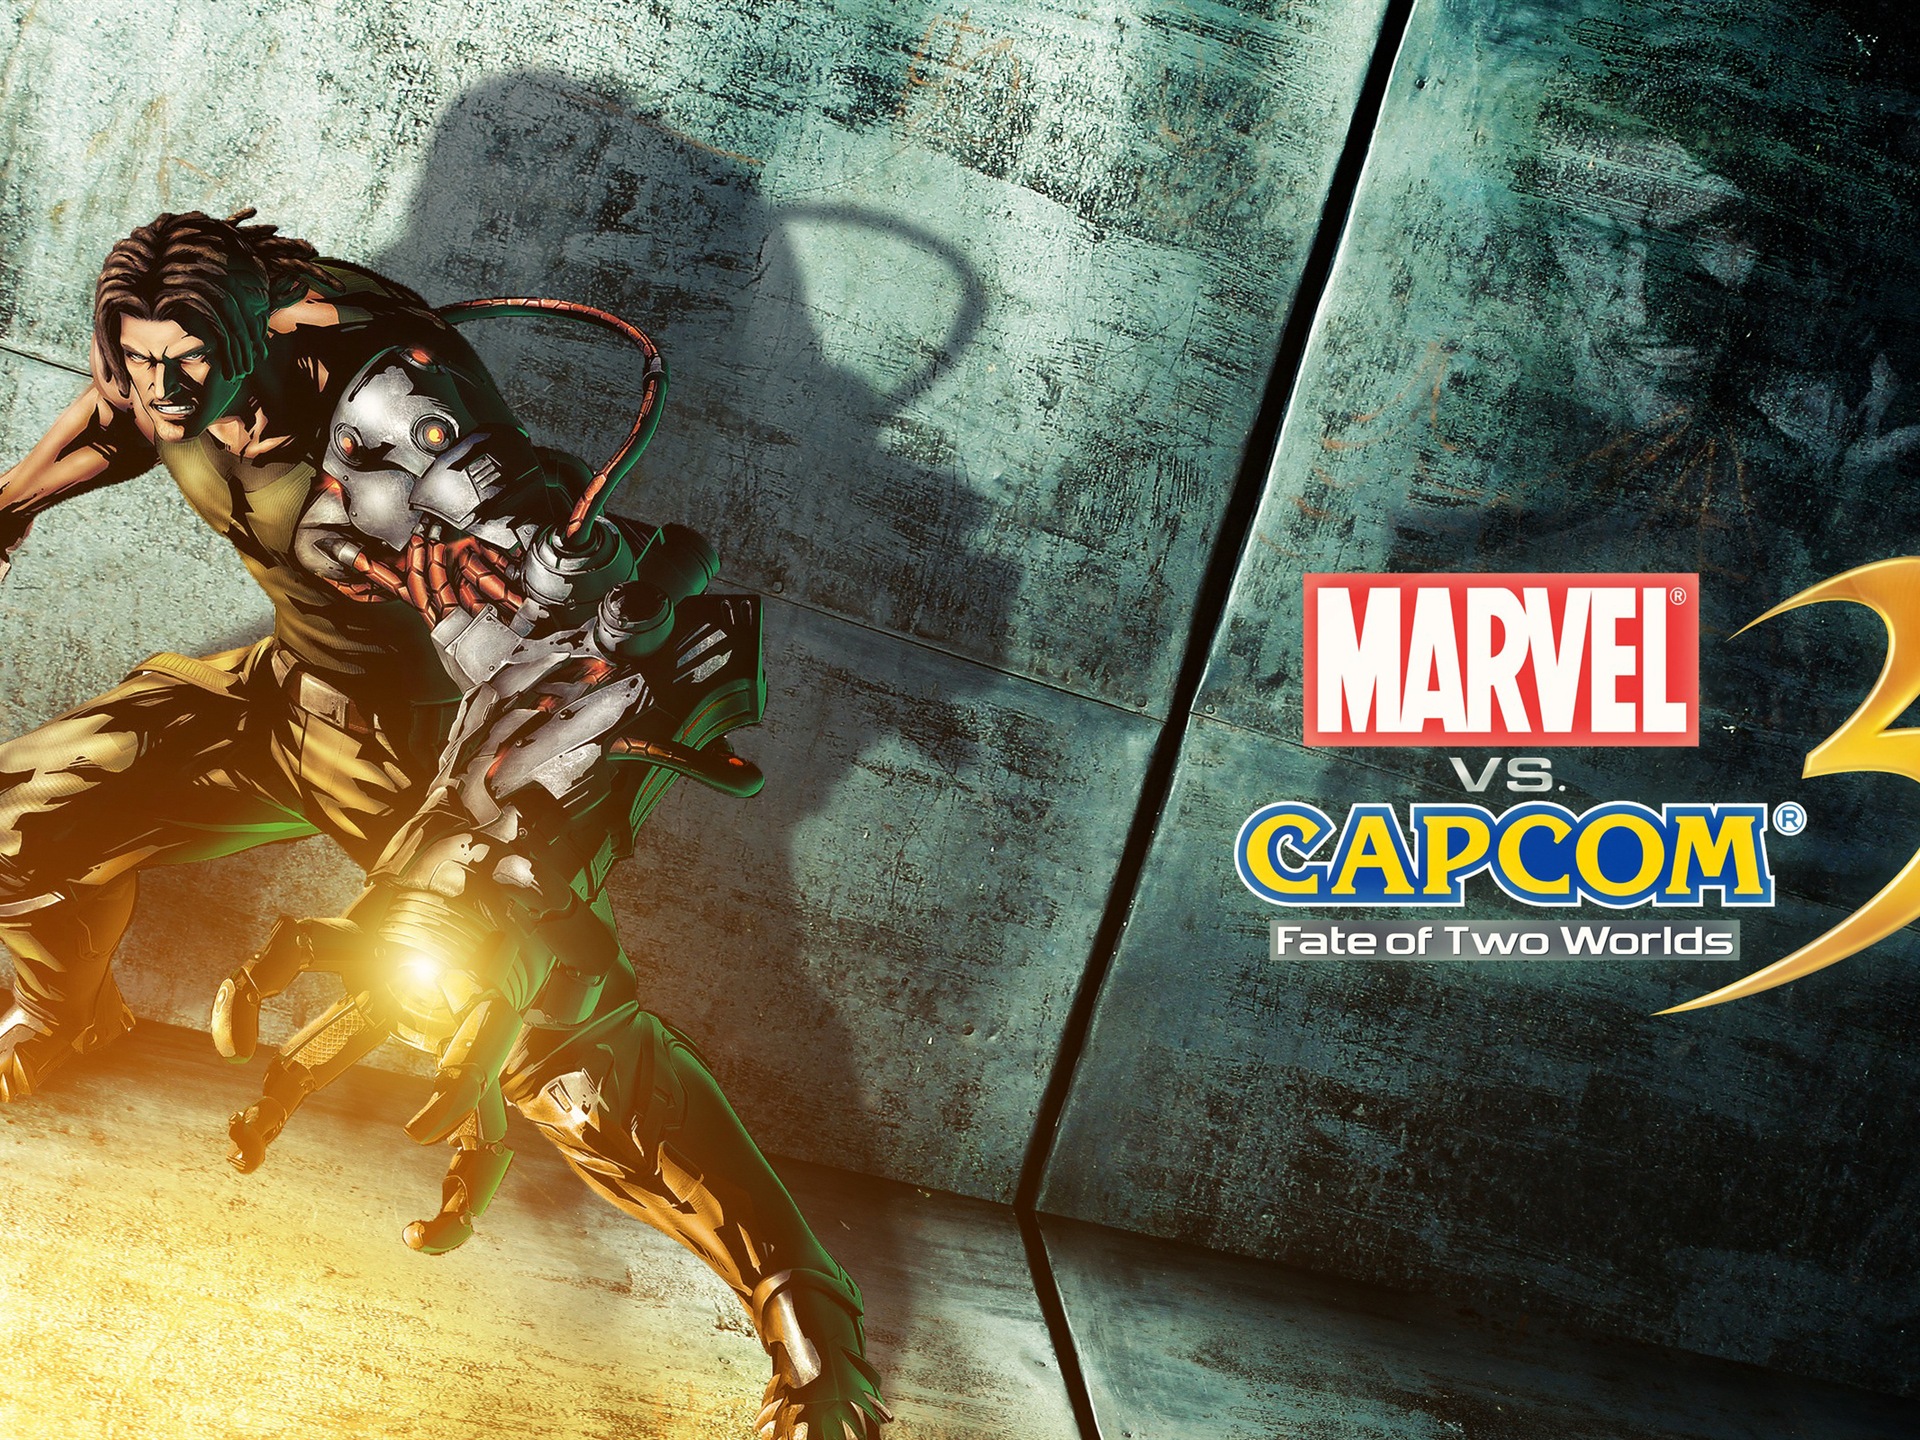 Marvel VS. Capcom 3: Fate of Two Worlds HD game wallpapers #8 - 1920x1440